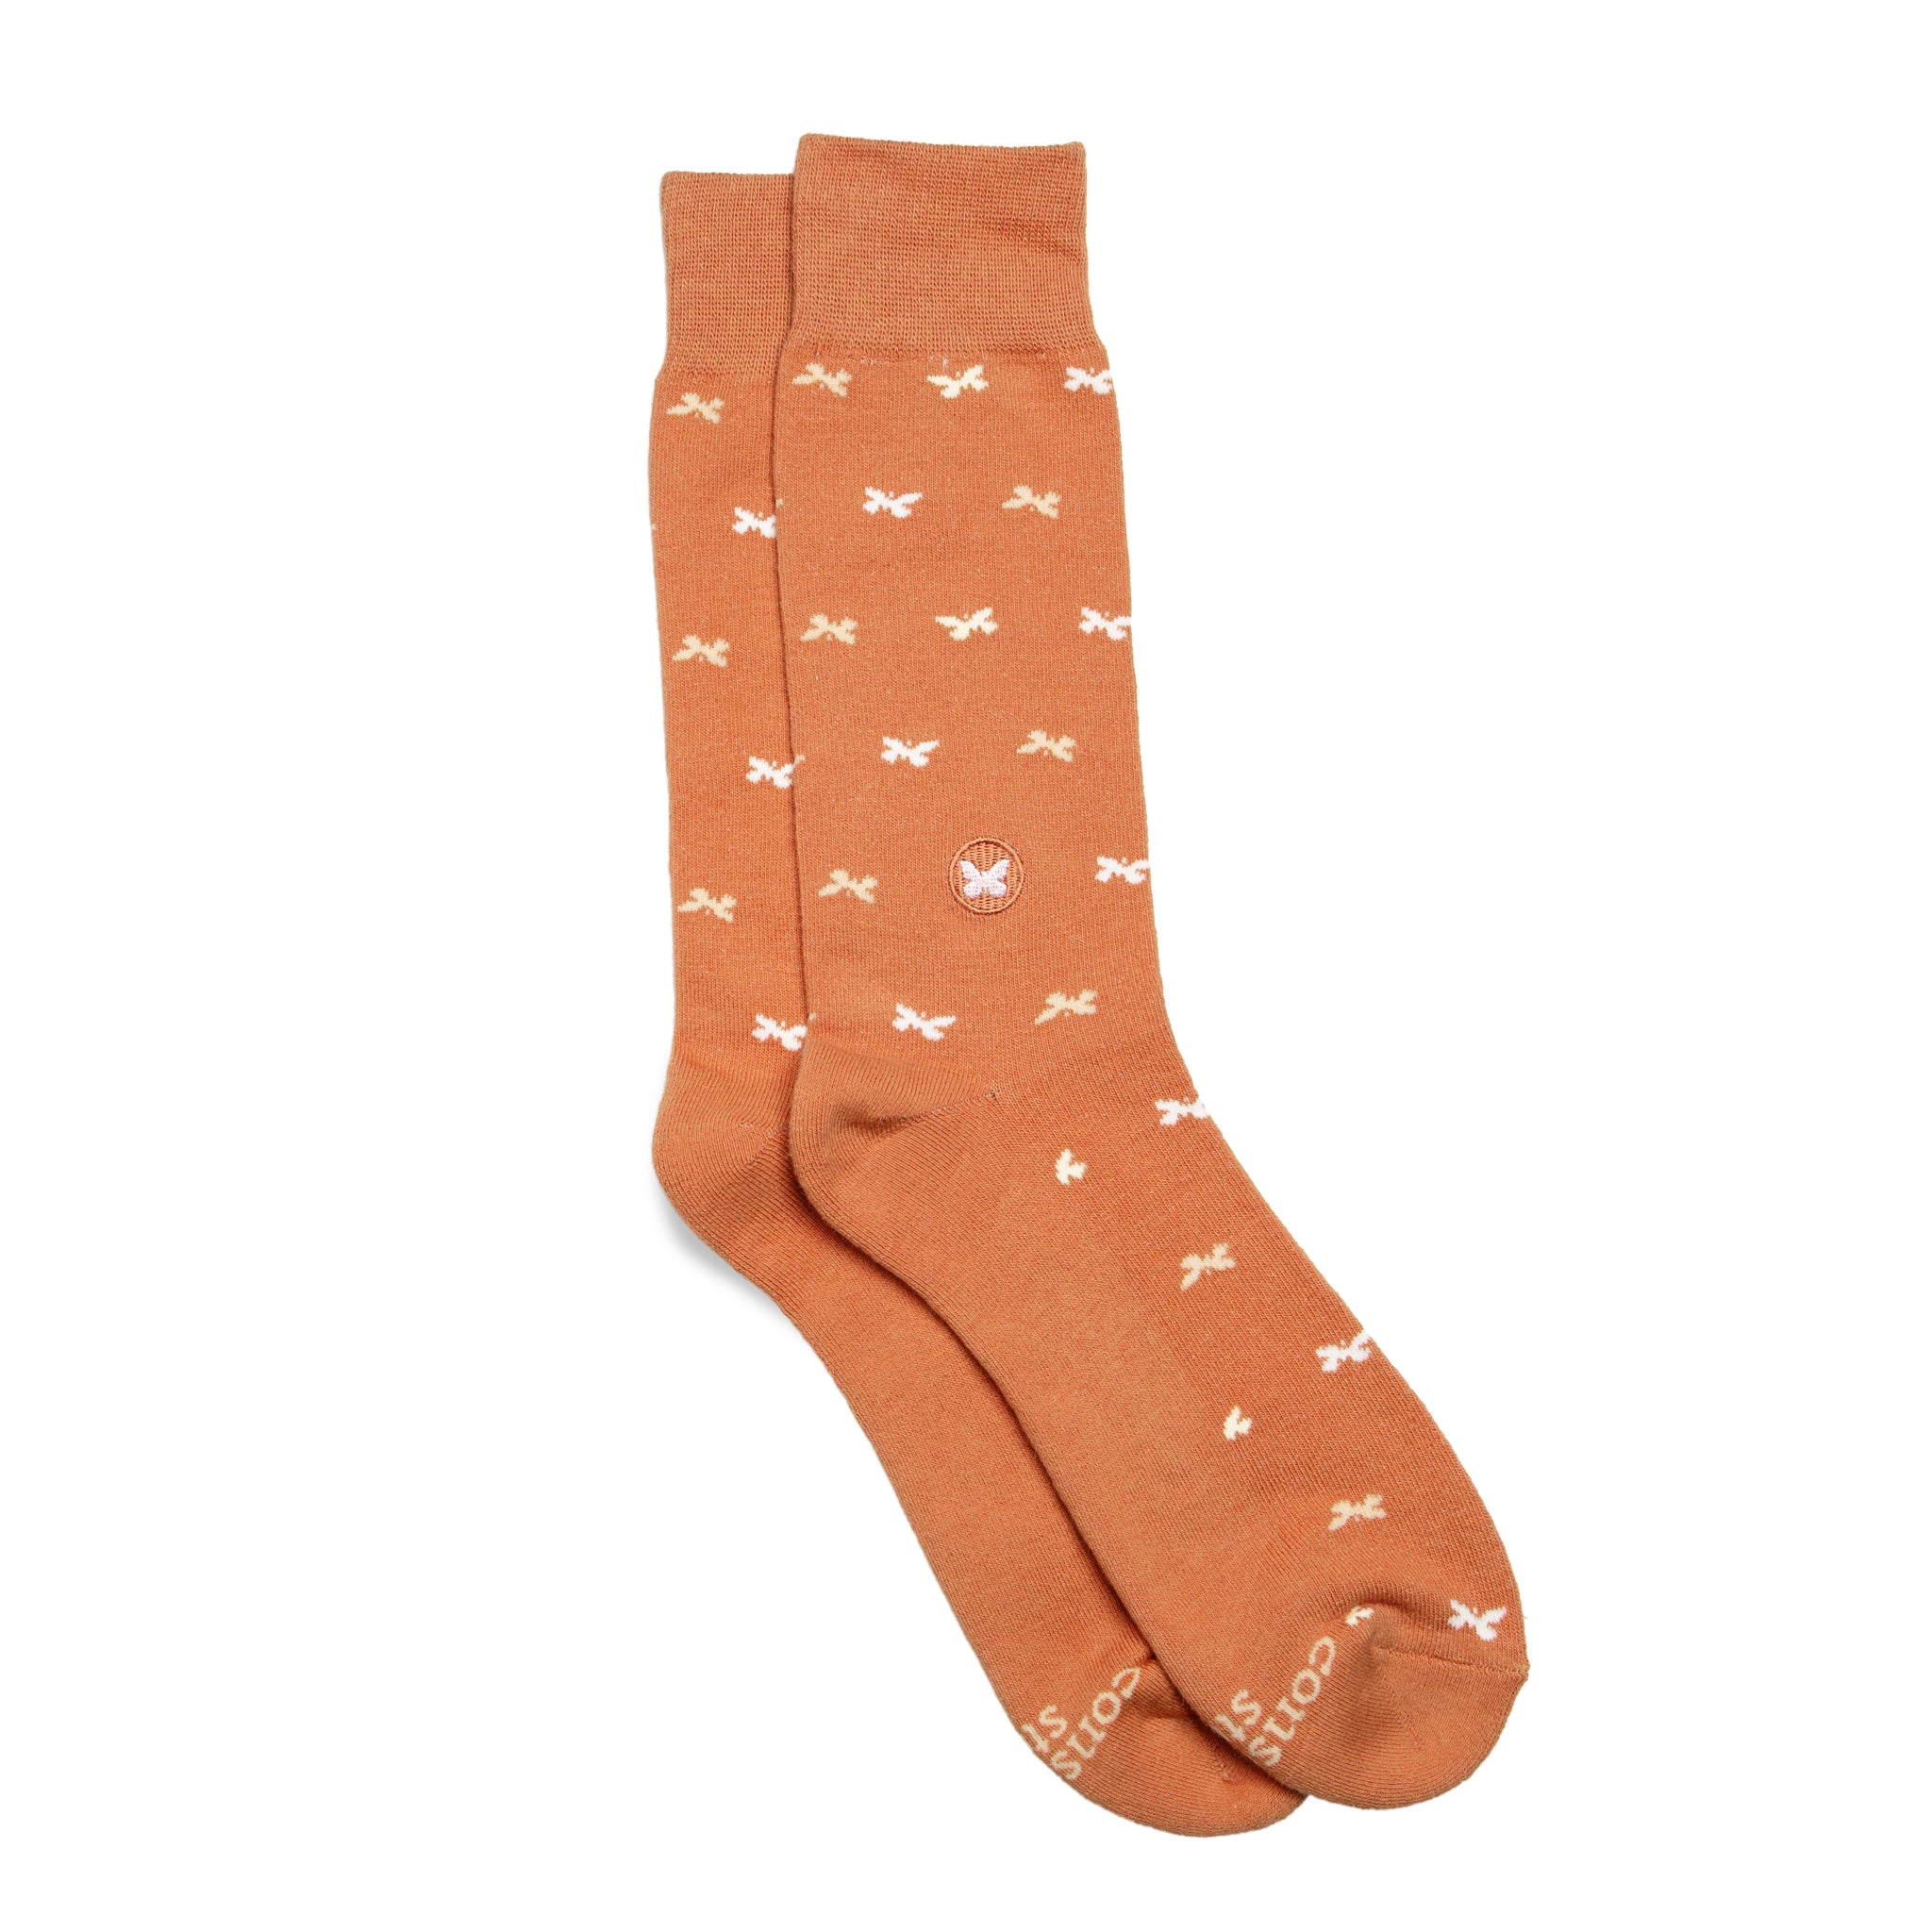 Conscious Step, Socks That Stop Violence Against Women - Floral S